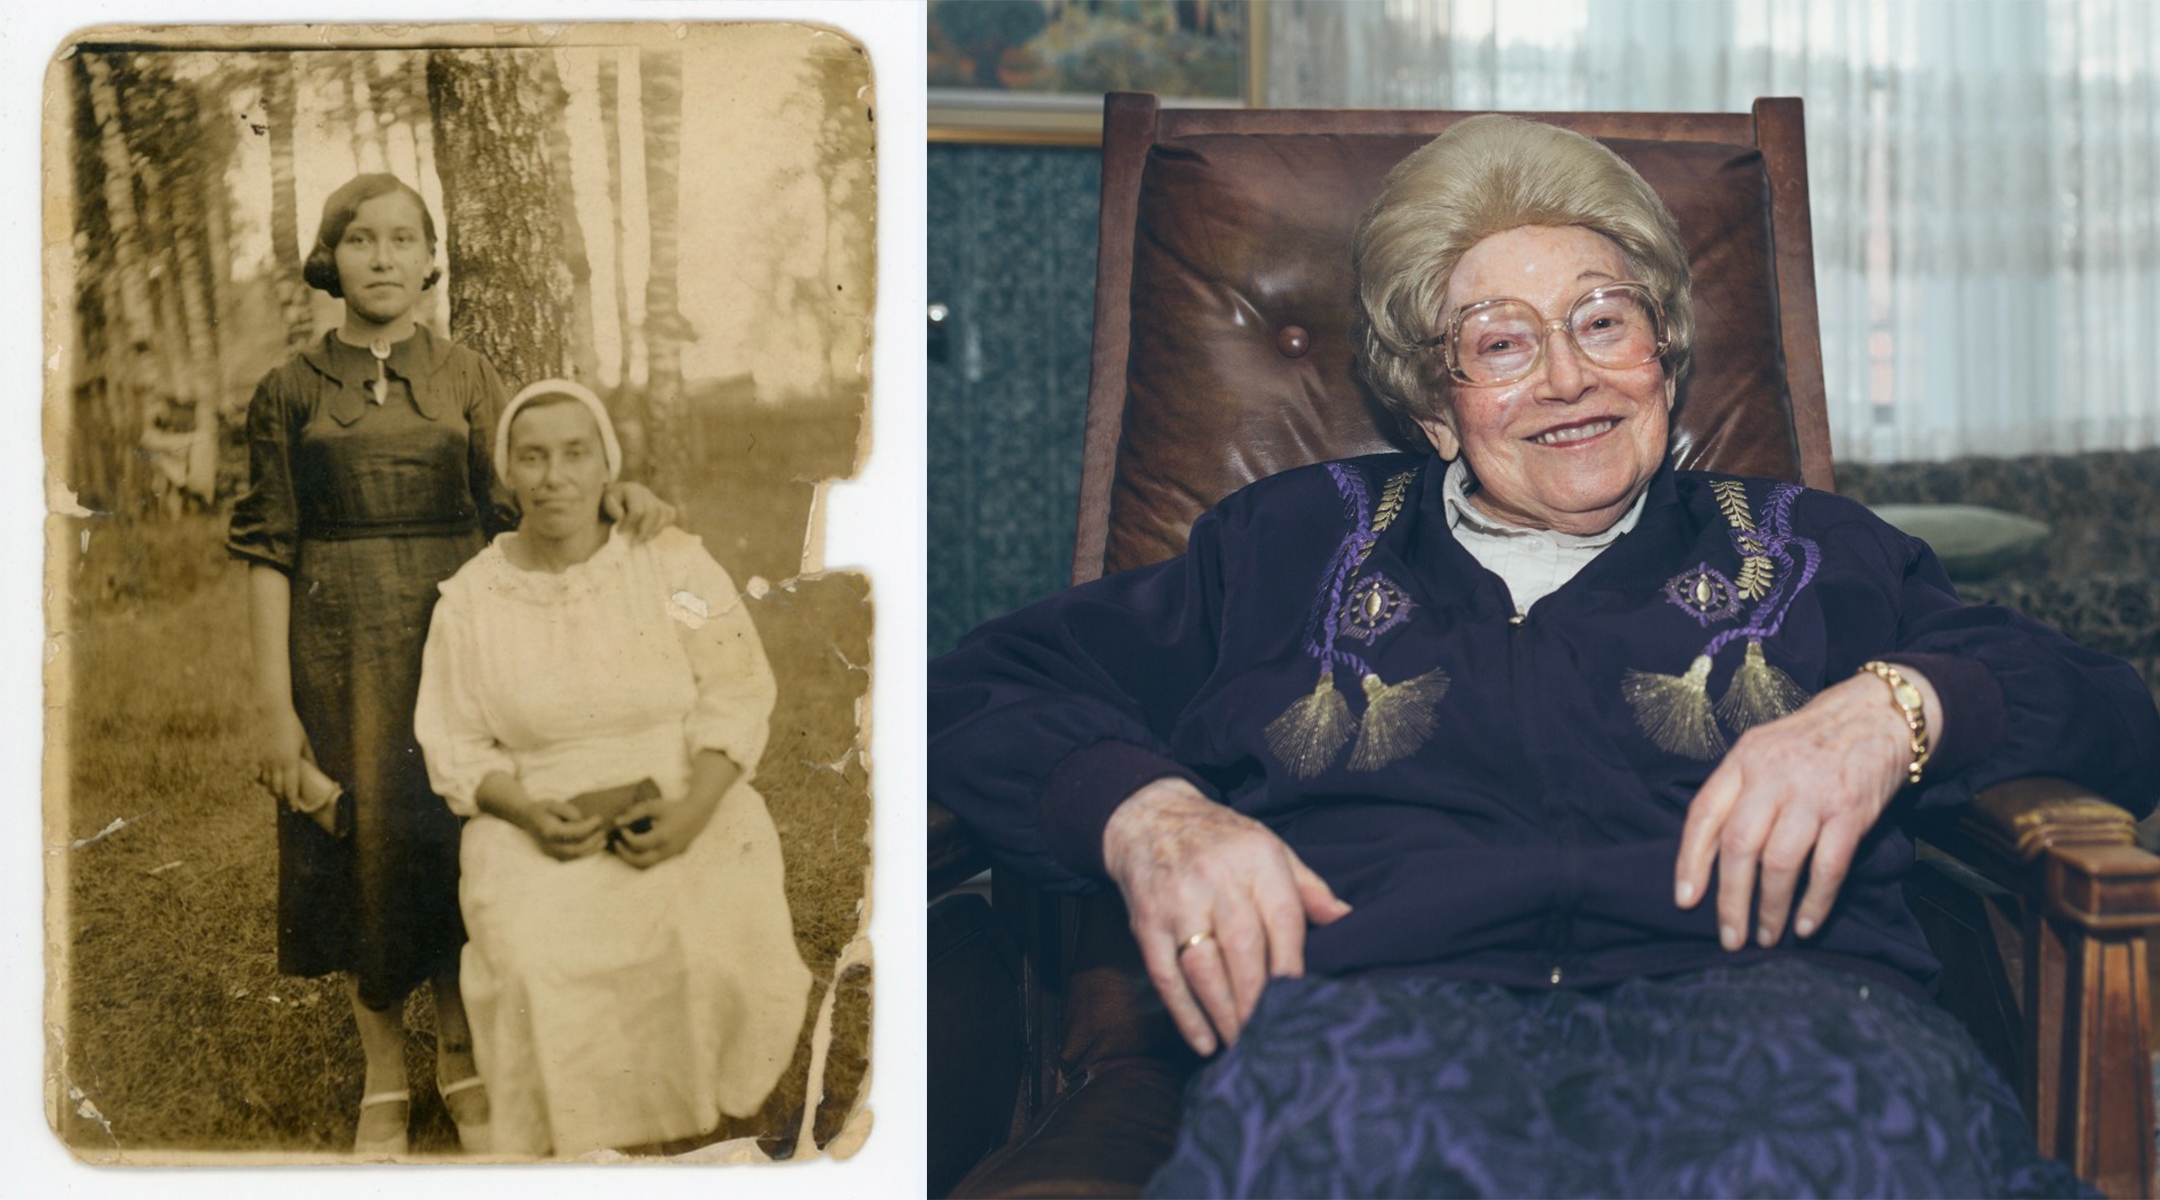 Two images of Shula Kazen, one from her youth and one from her old age